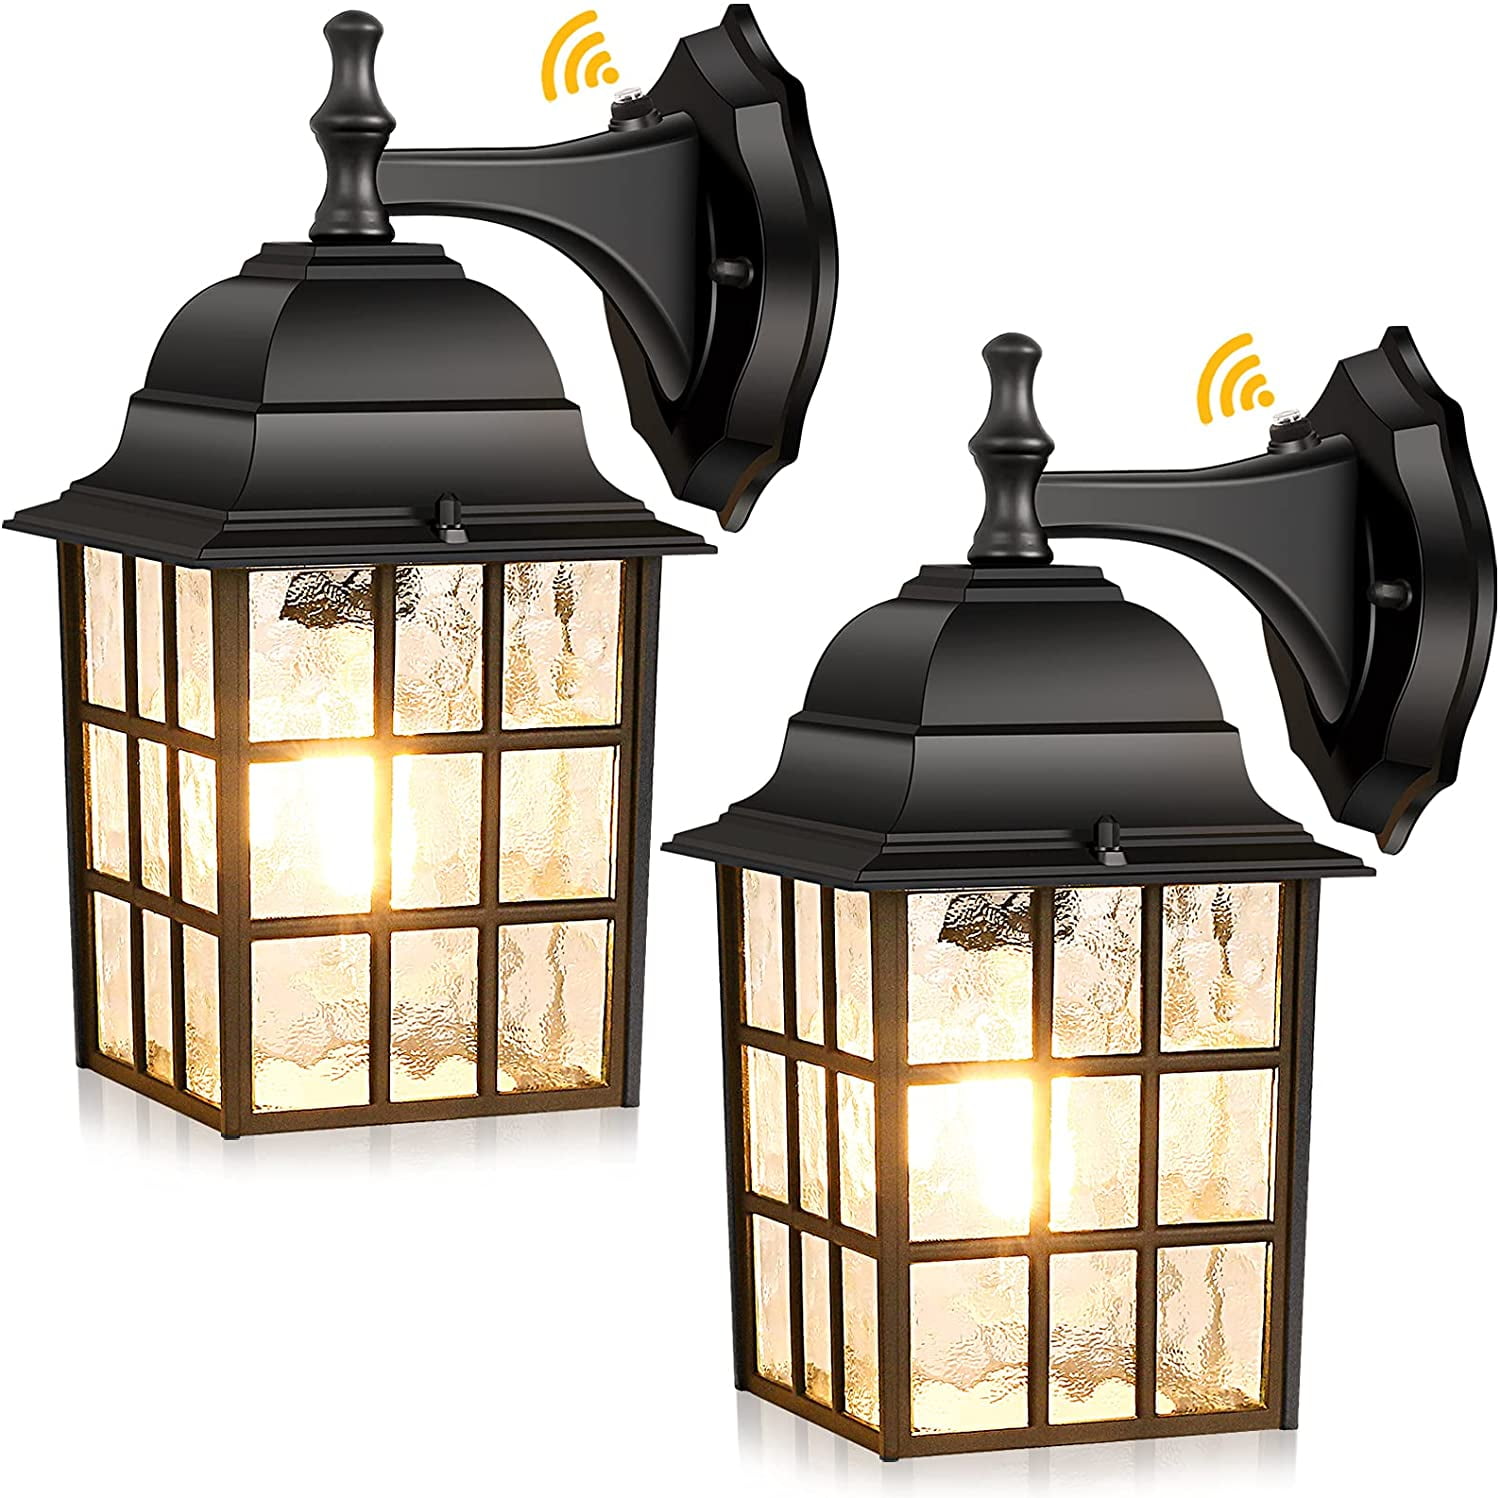 Exterior Wall Light Fixture LED 2 Pack Dusk to Dawn Sensor Outdoor Wall Sconce 